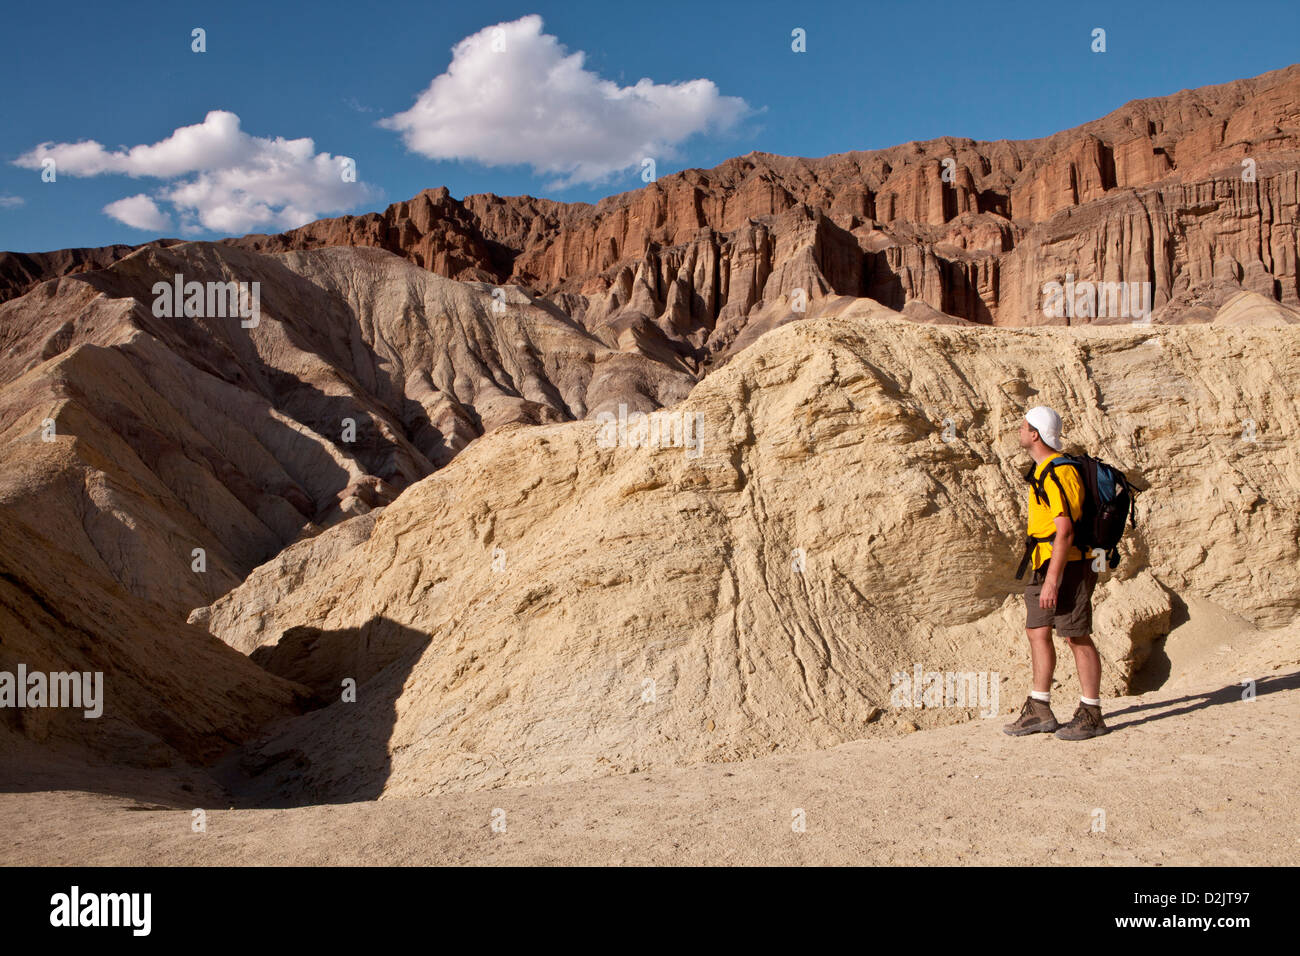 A hiker looks out over the Black Mountains during an evening hike of Golden Canyon in Death Valley National Park, California. Stock Photo